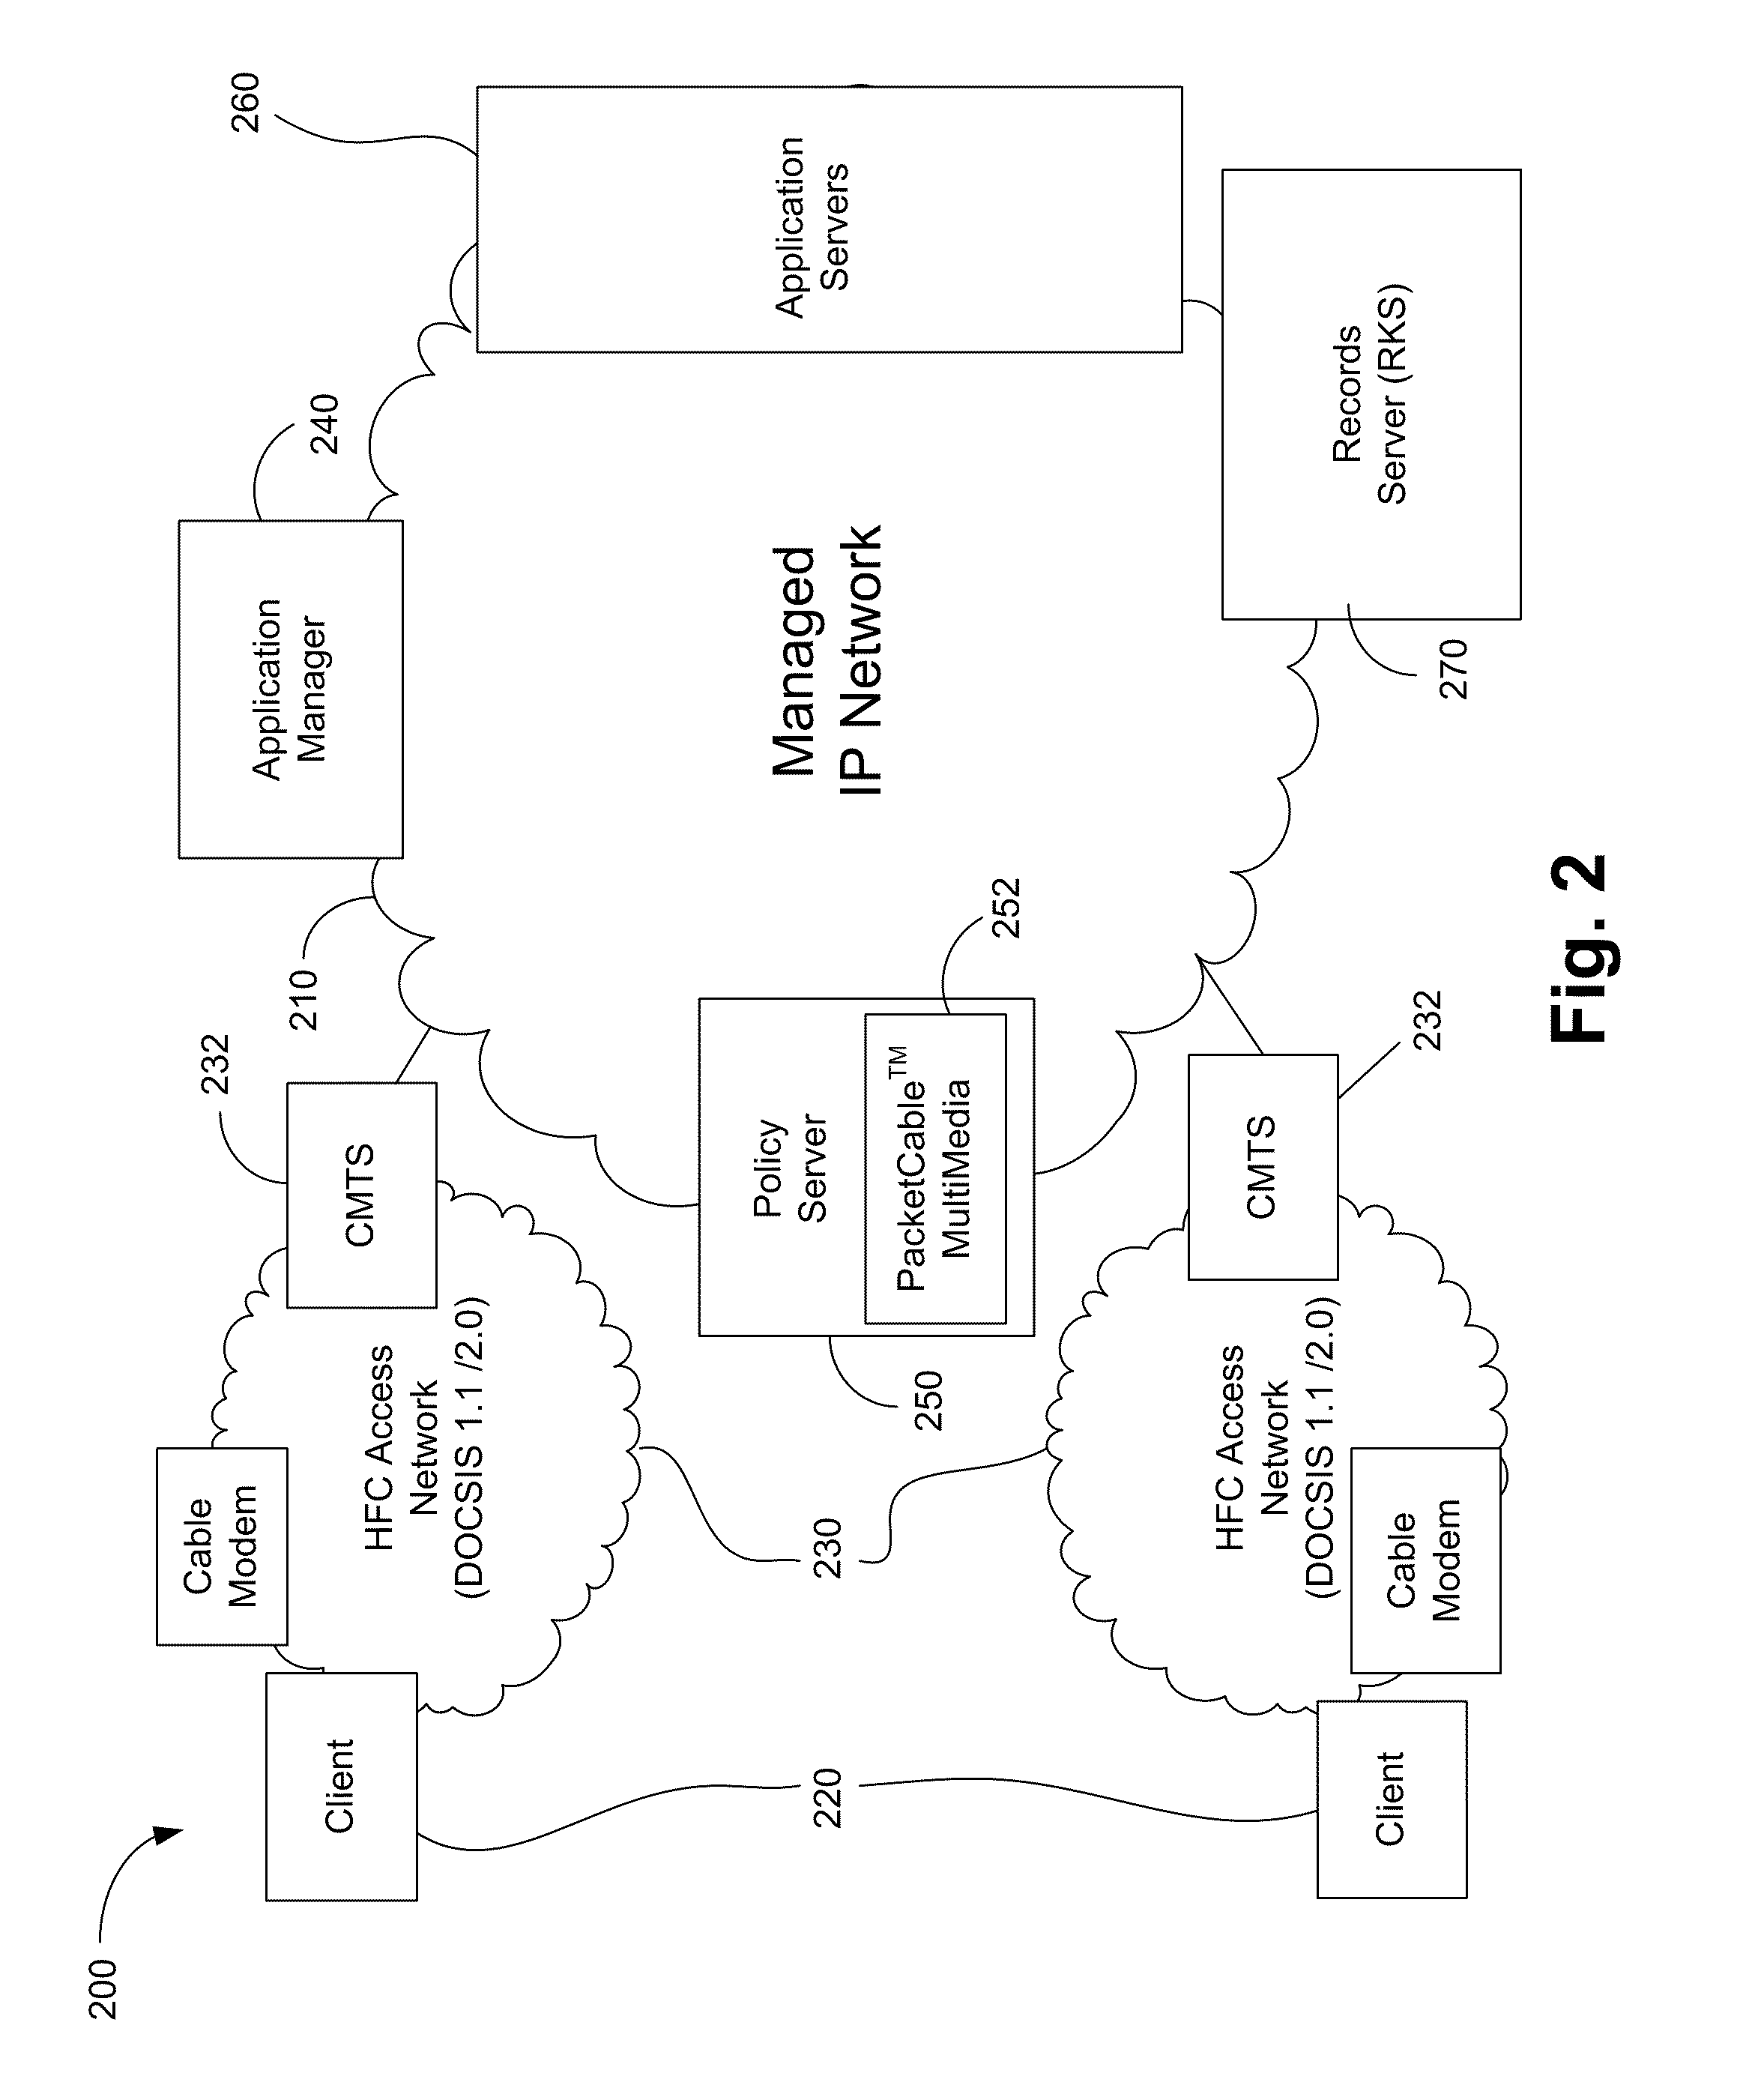 Dynamic adjustment of bandwidth for providing increased bandwidth during business hours